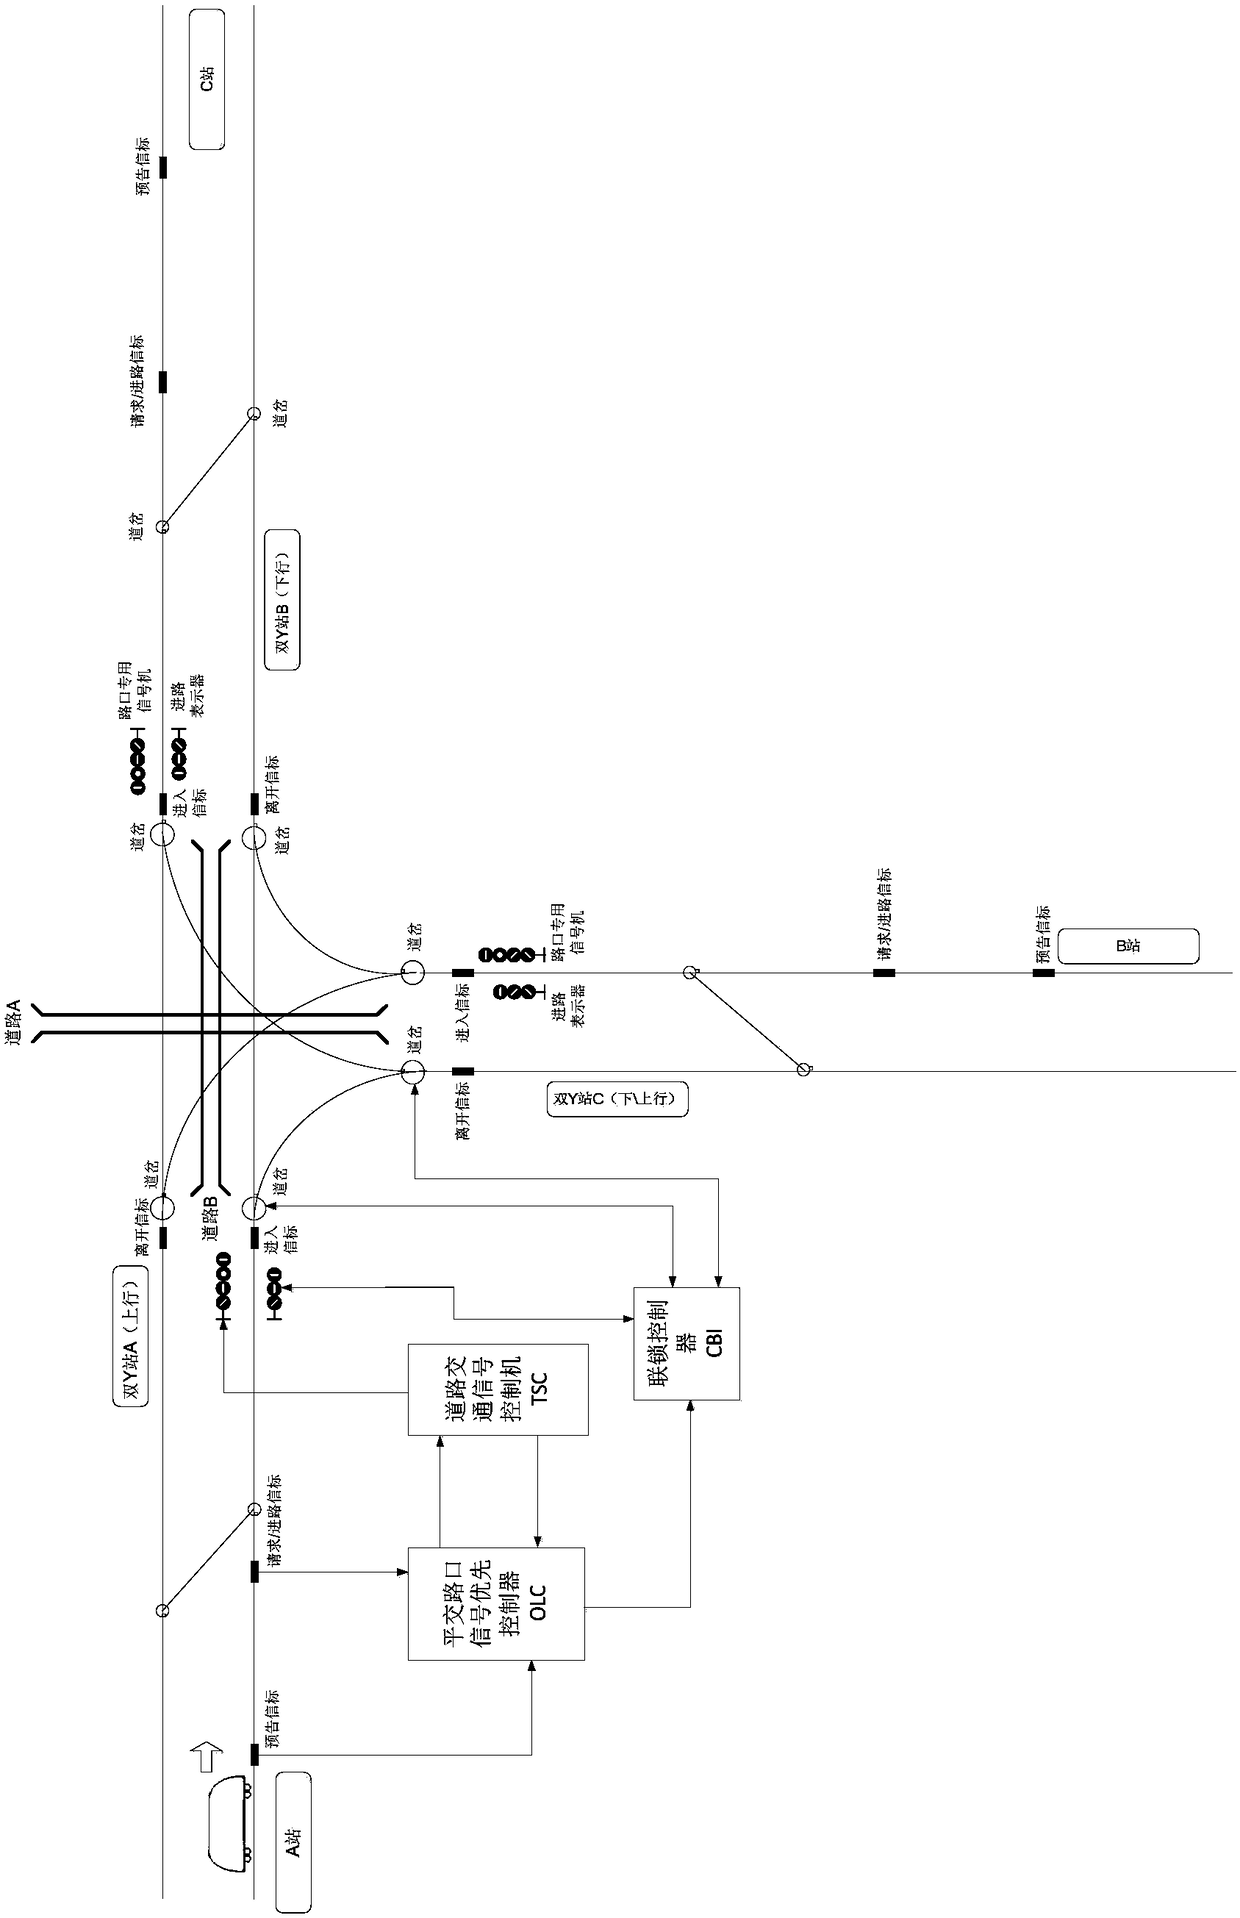 Double Y intersection priority control method for tram